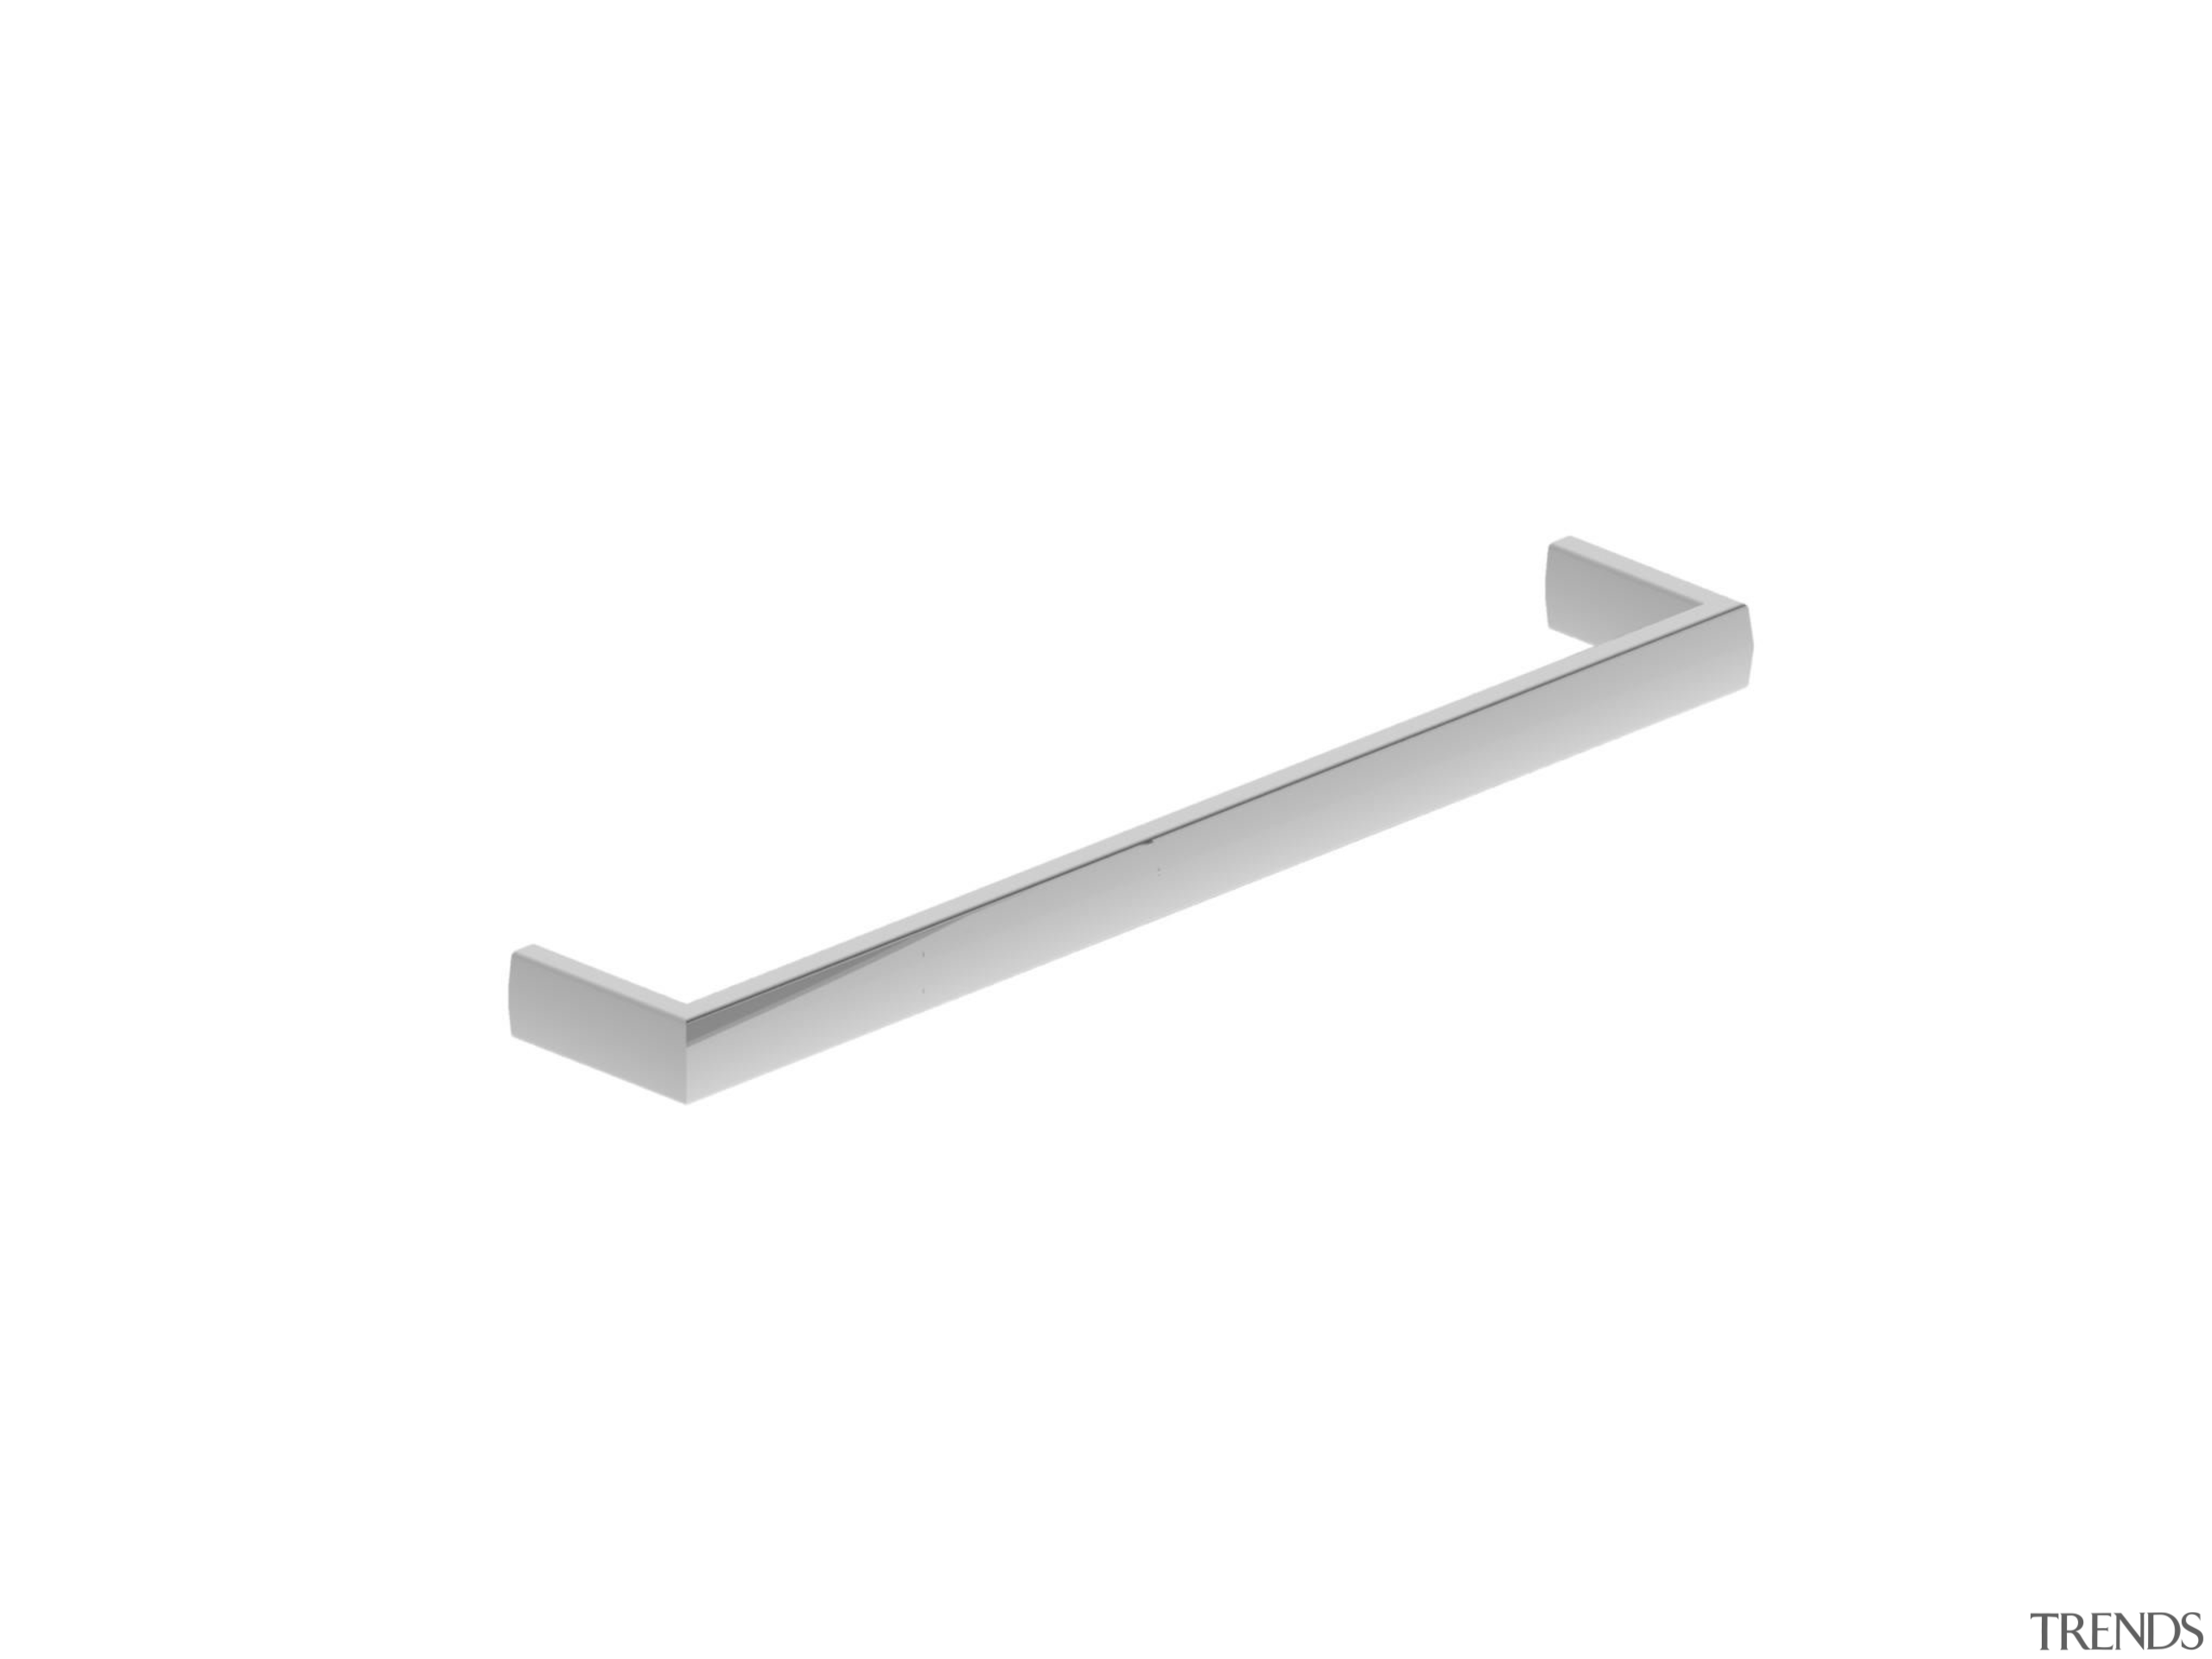 • Manufactured in Australia• Warranty 10 Years• Double angle, bathroom accessory, hardware accessory, line, product design, white